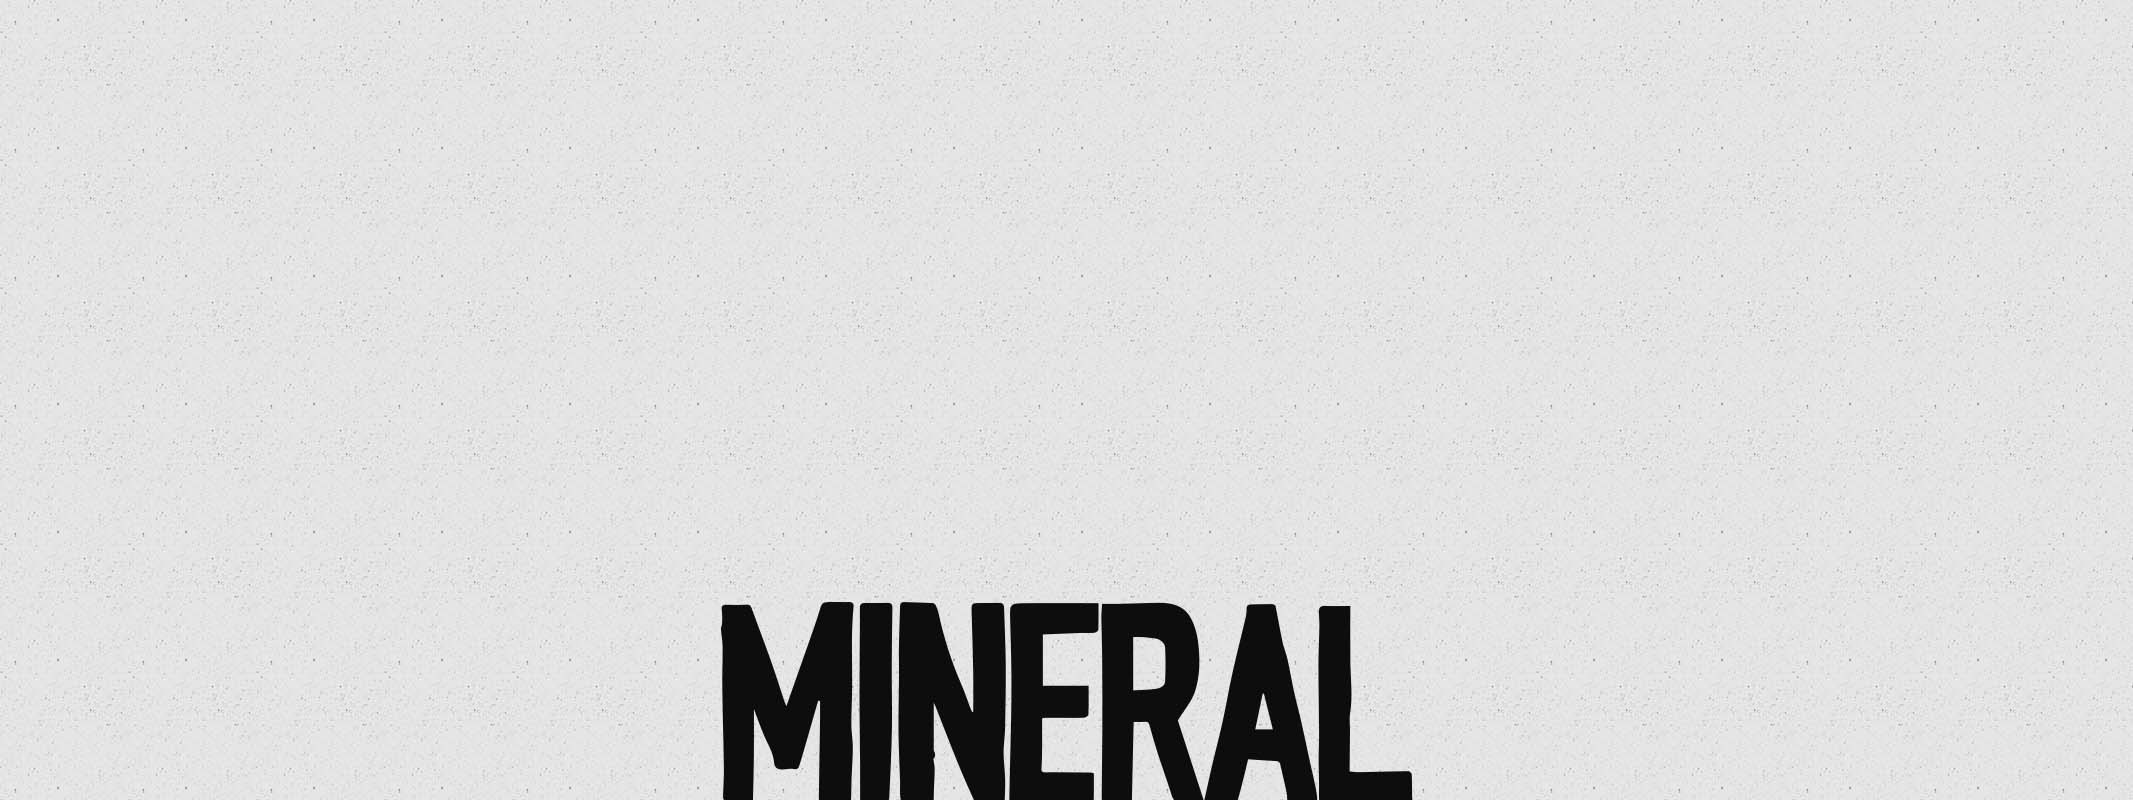 Mineral Wines logo superimposed on a textured background 